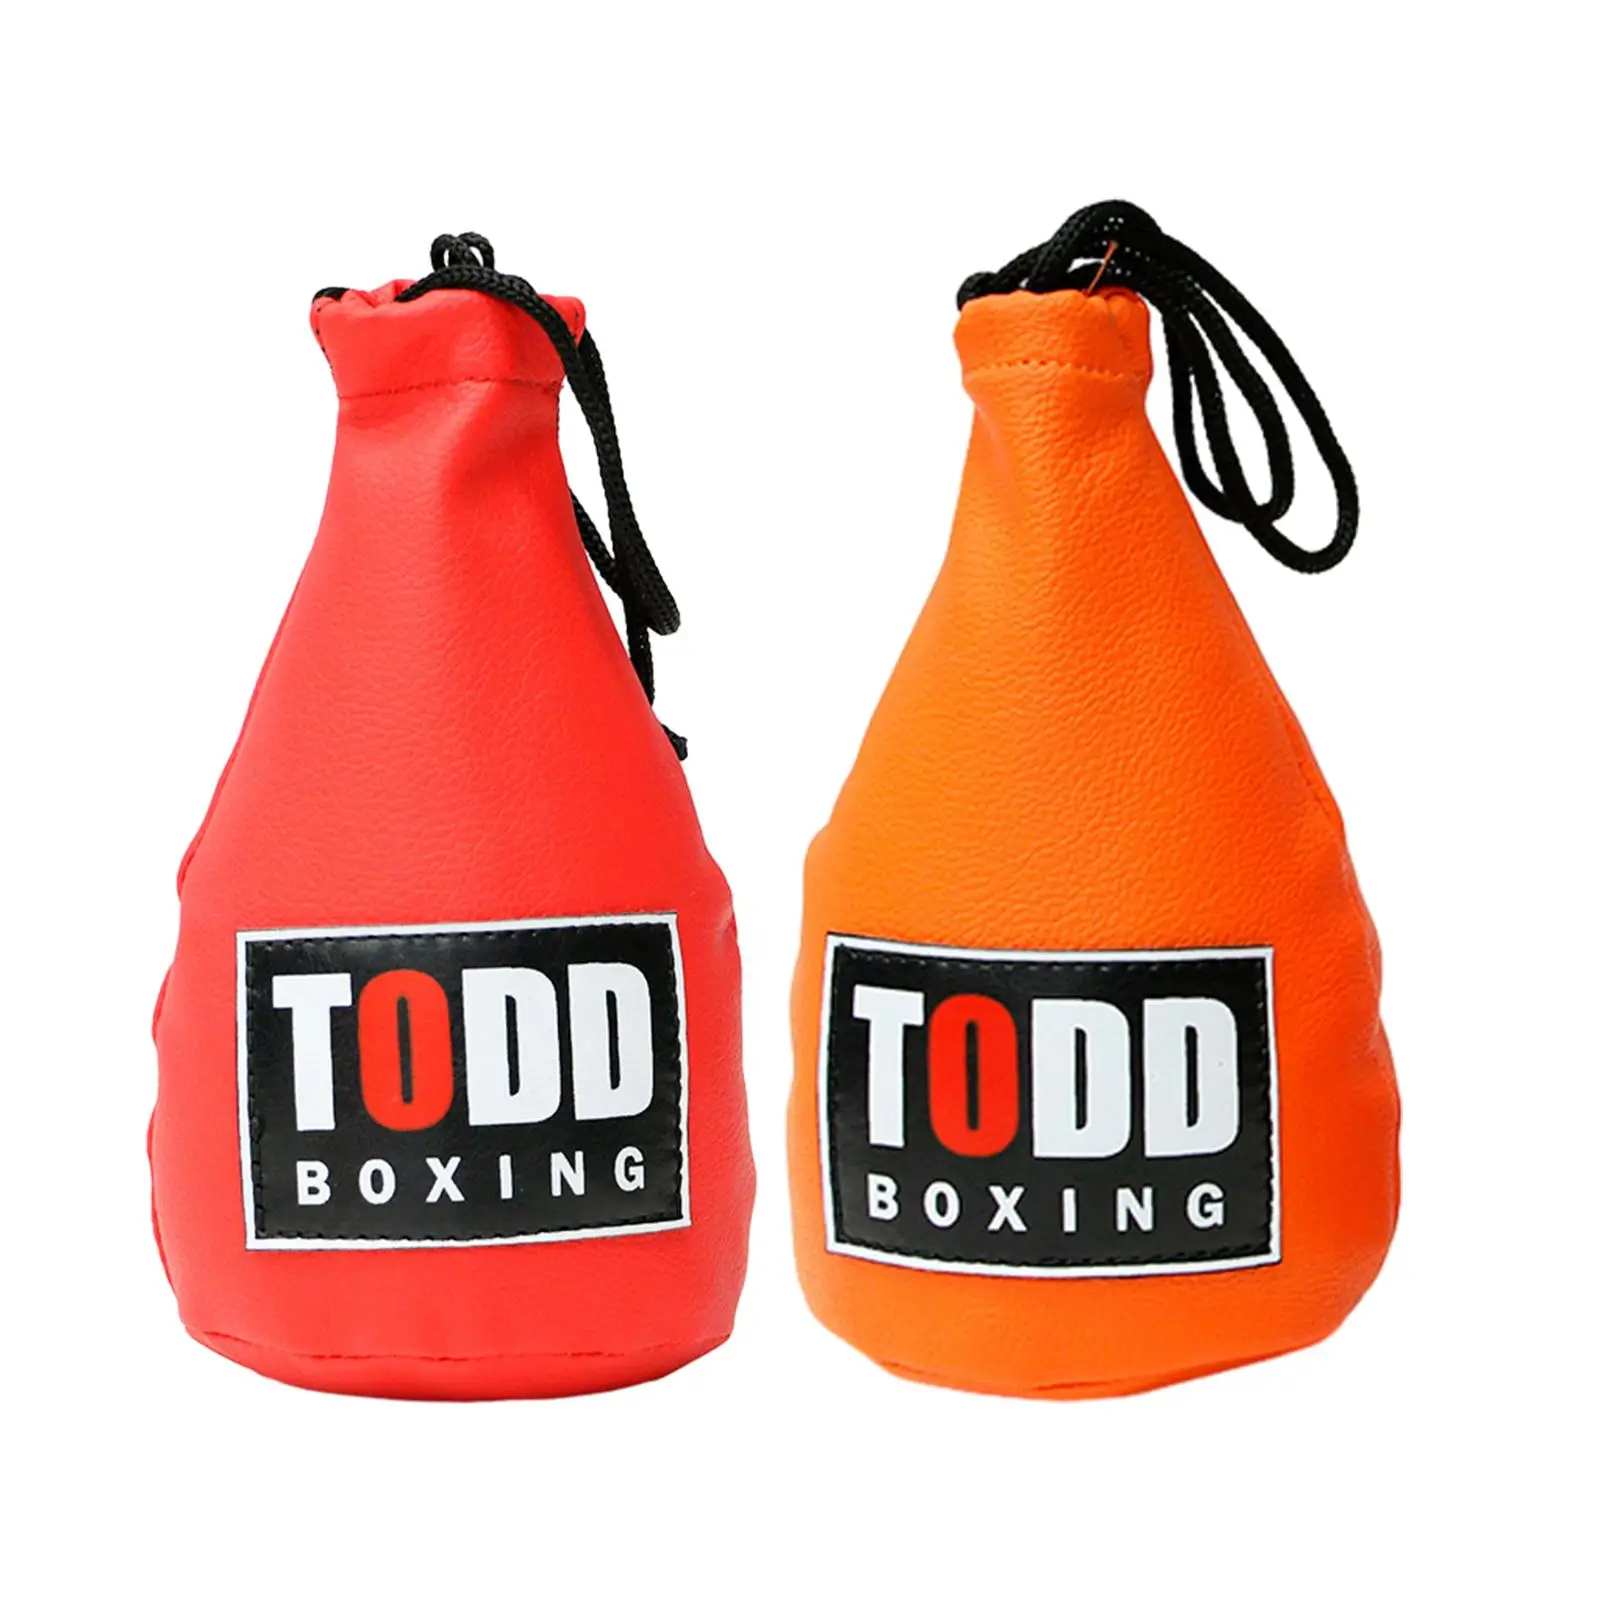 Boxing Dodge Training Bag Punch Exercise Gear Boxing Punch Bag for Agility Fight Skill Punching Speed Reaction Taekwondo